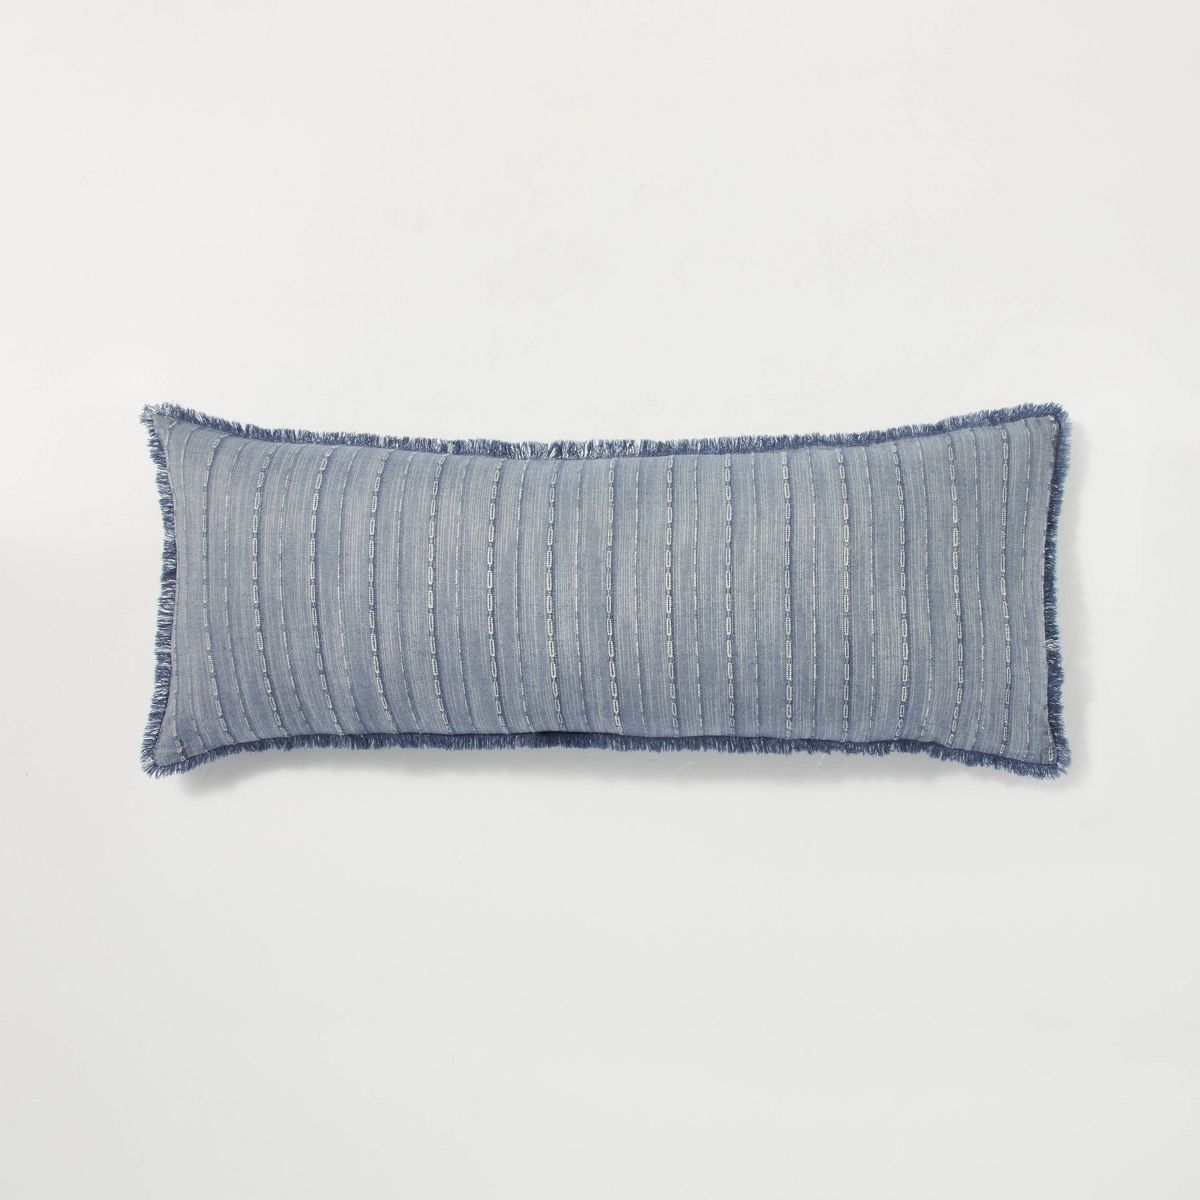 16"x42" Washed Loop Stripe Lumbar Bed Pillow Blue - Hearth & Hand™ with Magnolia | Target